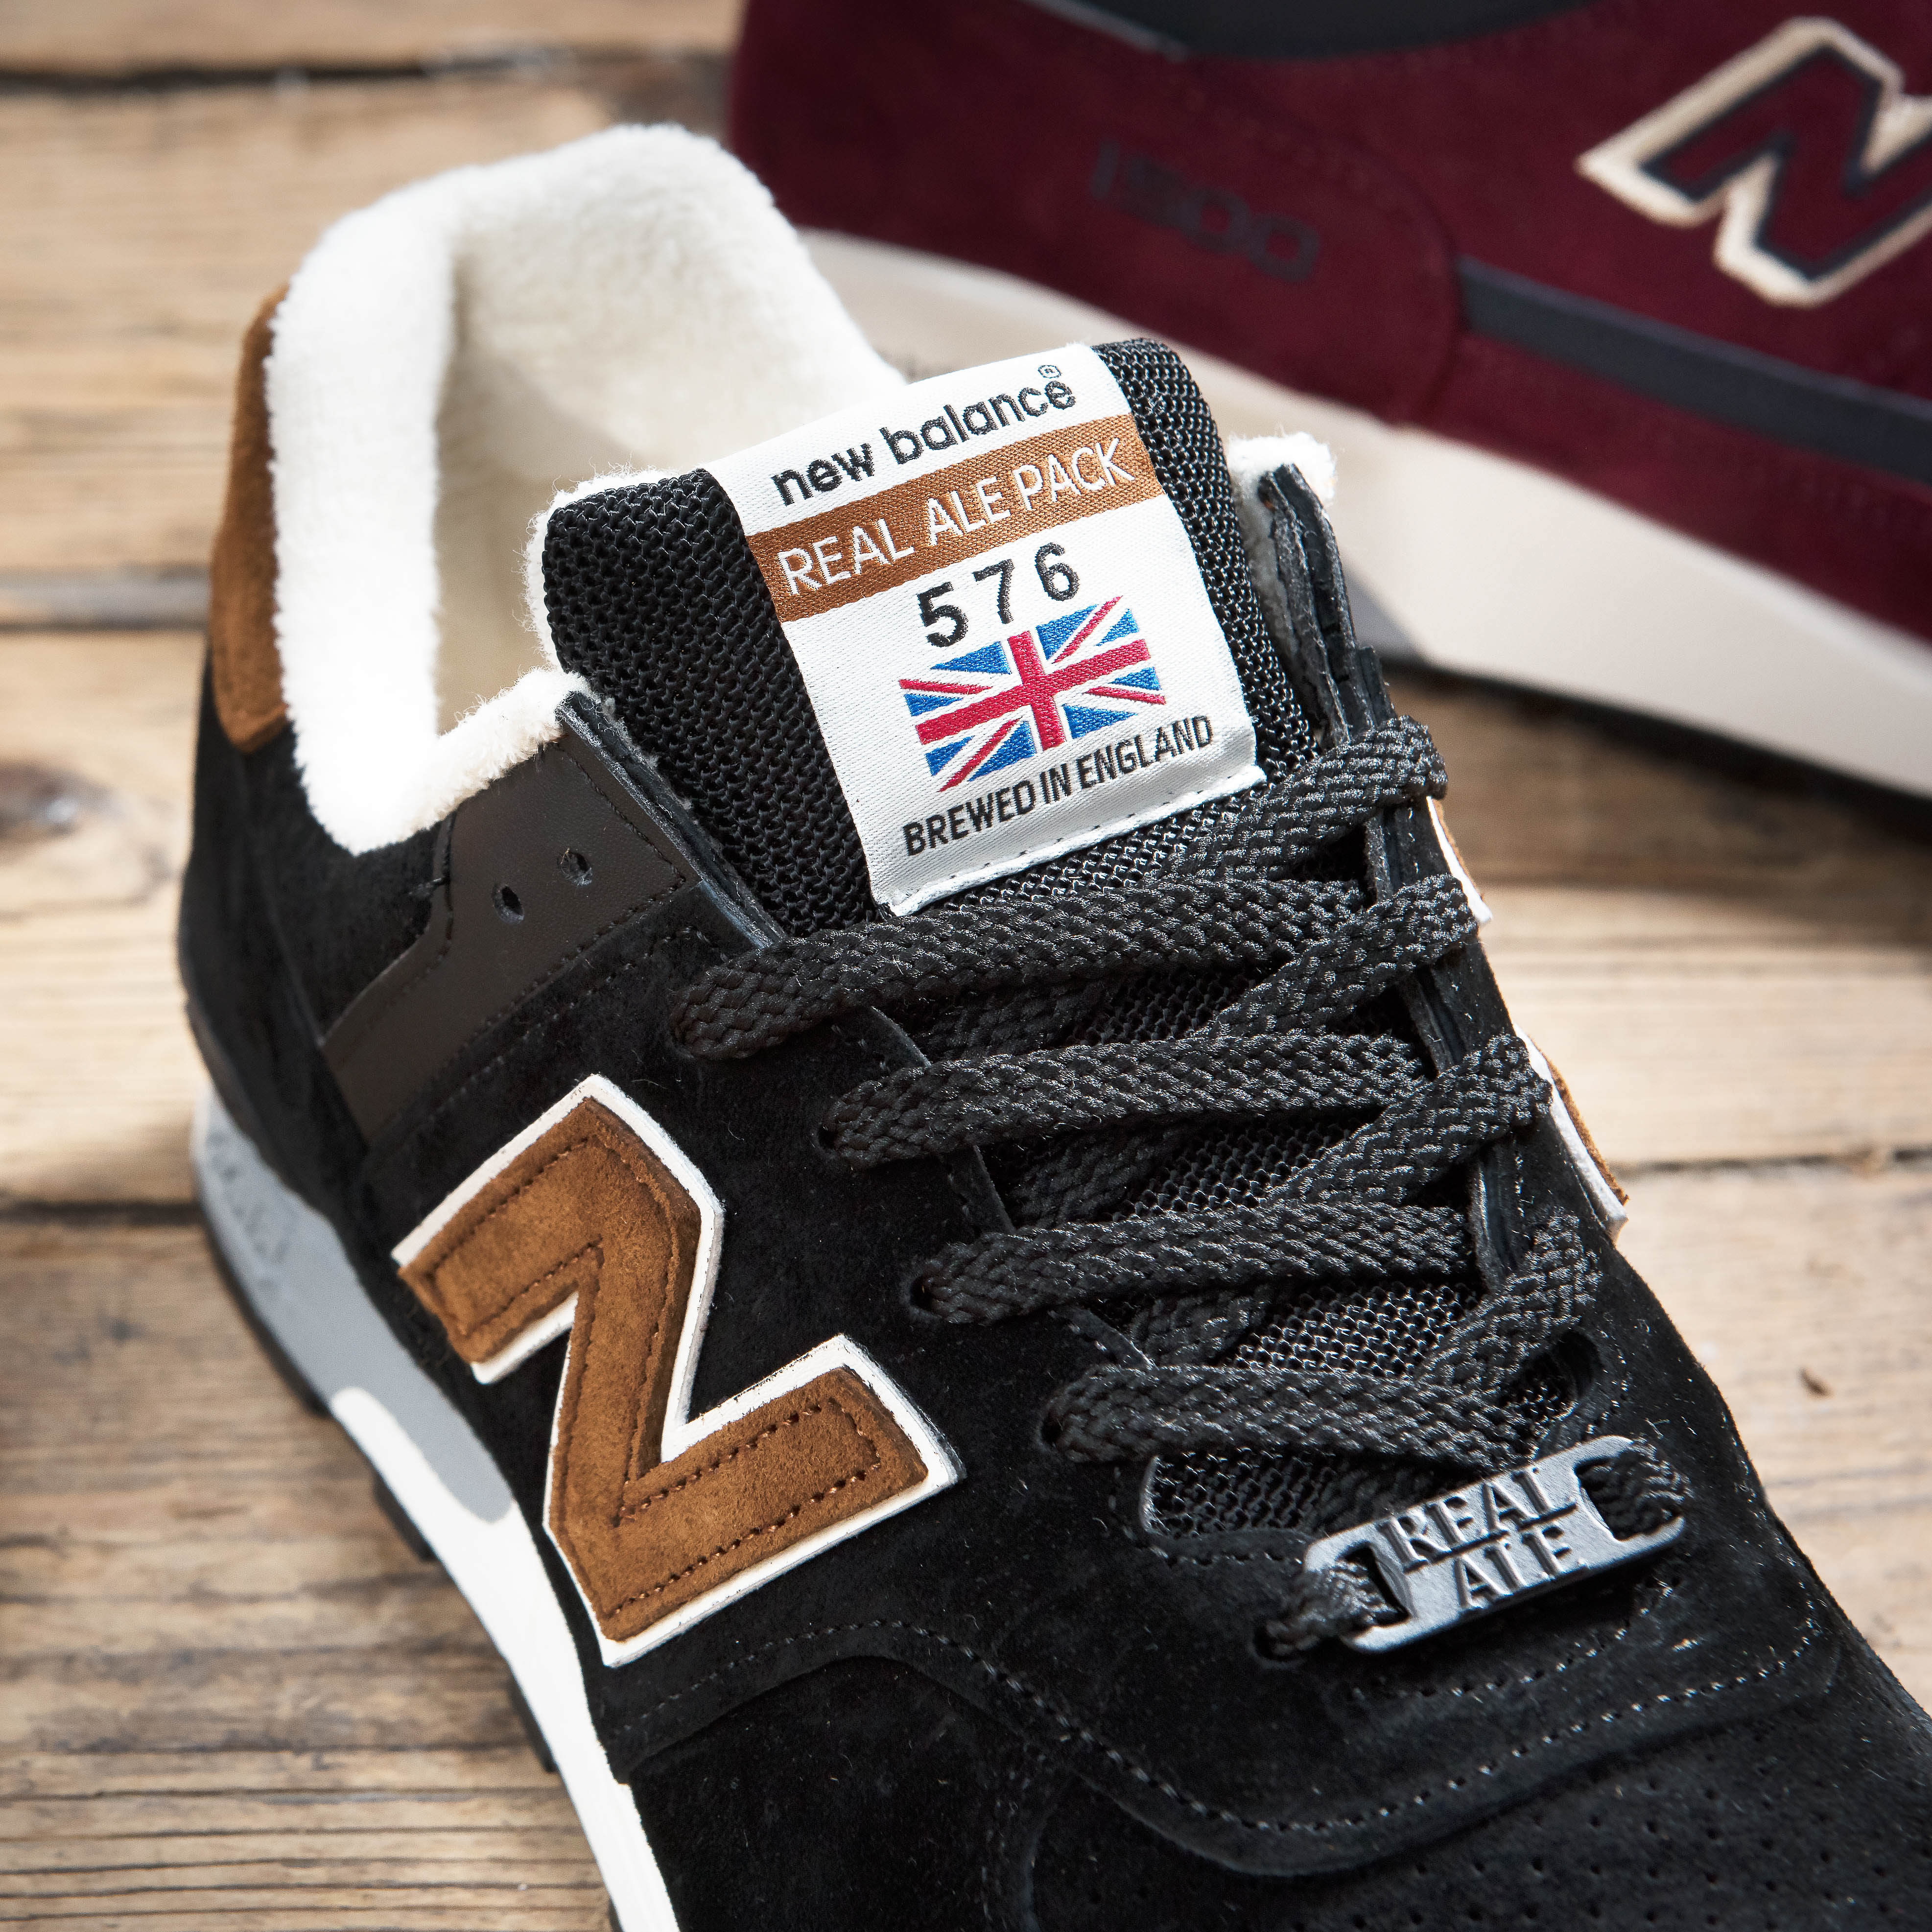 New Balance “Real Ale” Pack | New Balance Gallery